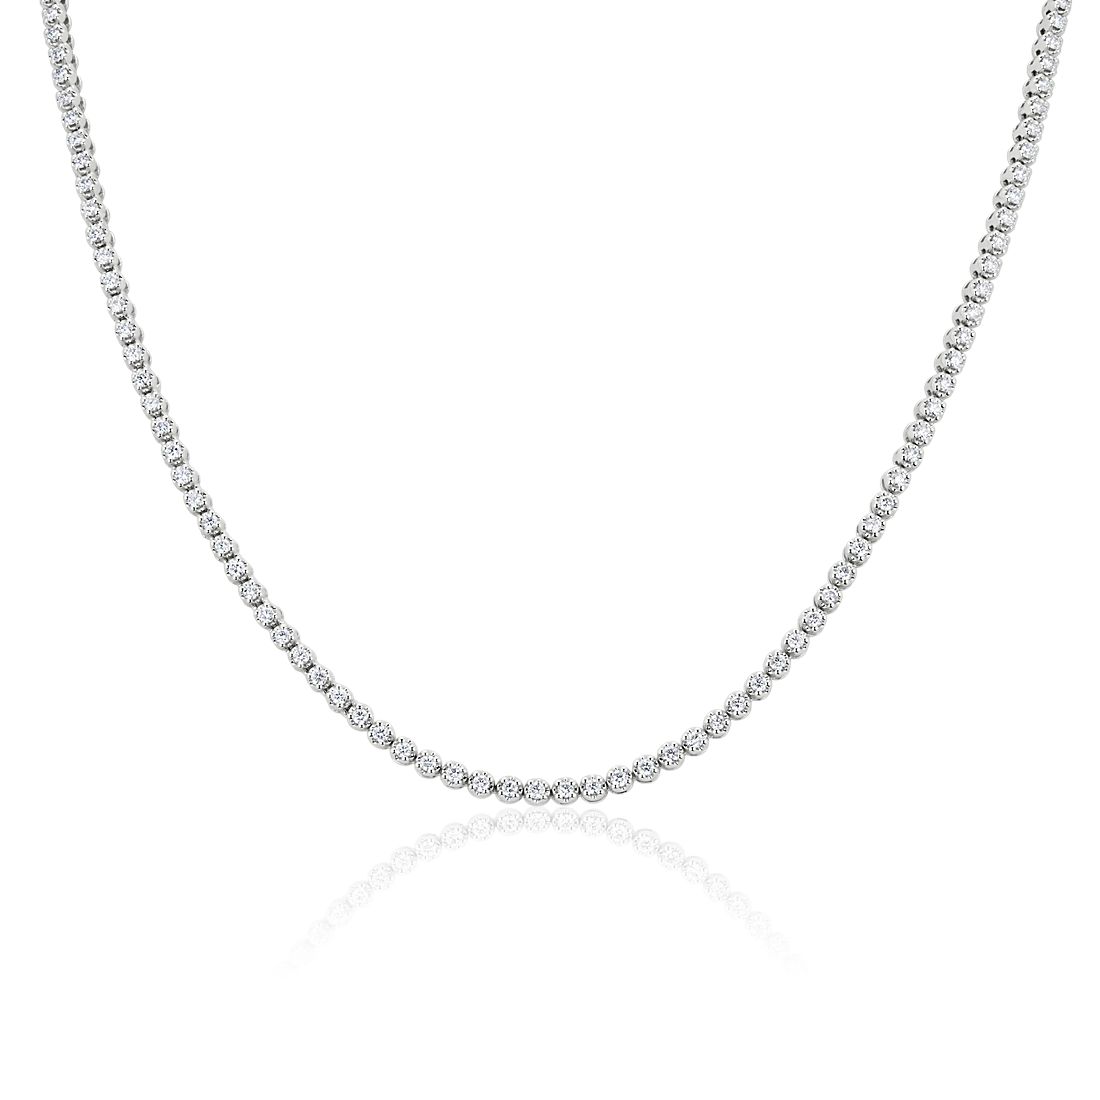 Straight Diamond Eternity Necklace in 14k White Gold (3 ct. tw.)